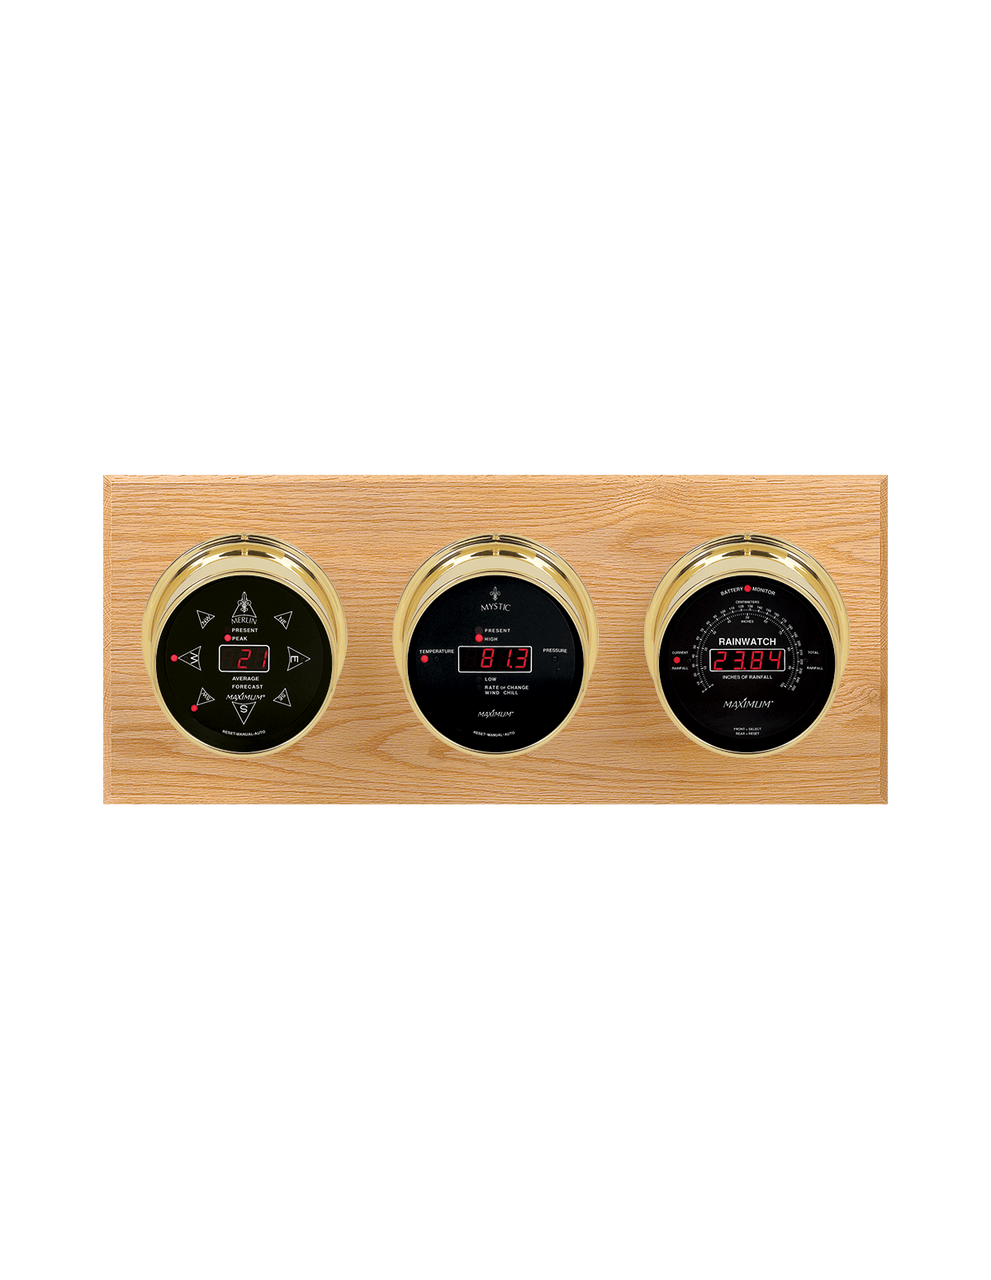 Blackwatch LED Wind, Thermometer, Barometer, and Rainfall Weather Station - 3 Instruments - Polished Brass Cases - Oak